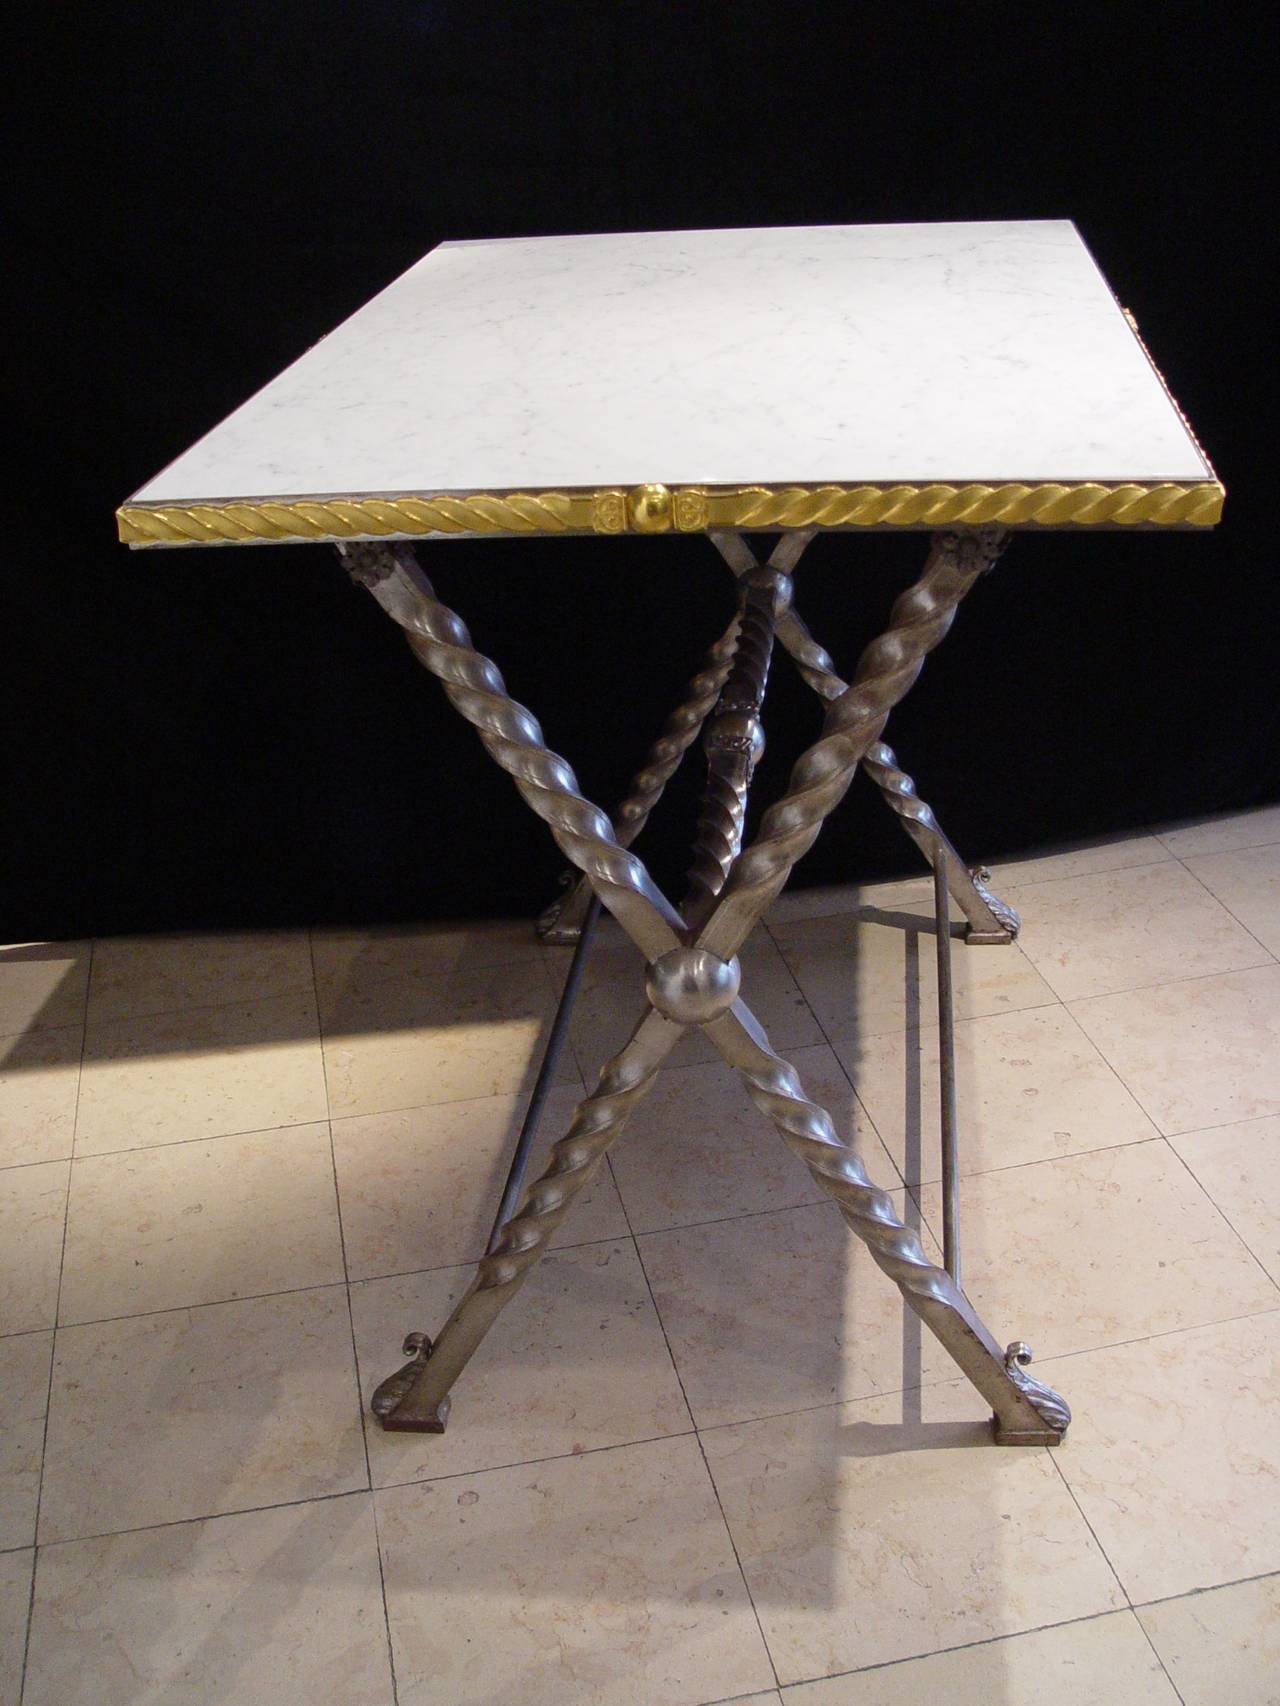 A wrought iron table with Carrara marble top,
consulate, circa 1800
gilded bronze belt around the top
Dimensions: W 41 ¾ in X D 29.5 in x H 36 in.

This table recalls the folding campaign tables under Napoleonic times, where army officers used